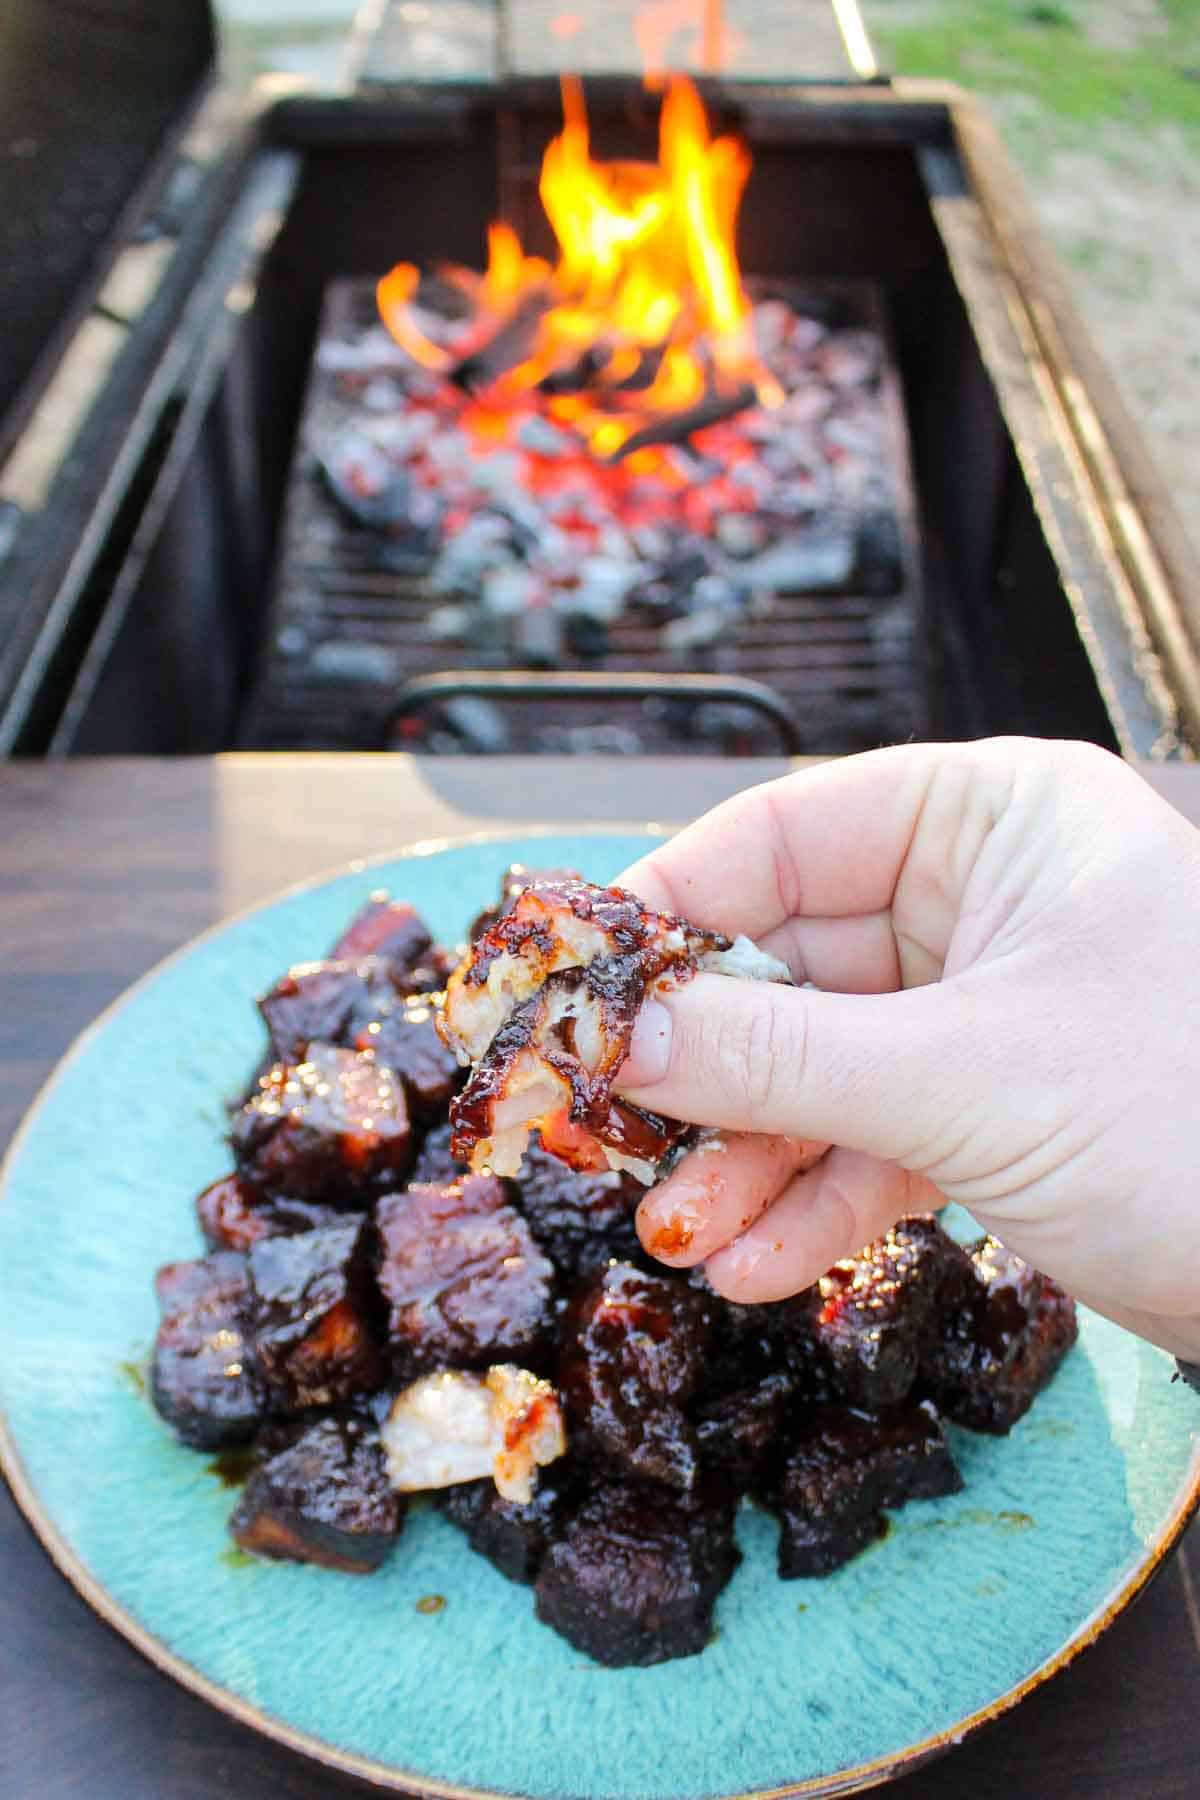 Derek Wolf gets ready for a bite of Smoked Pork Burnt Ends. 